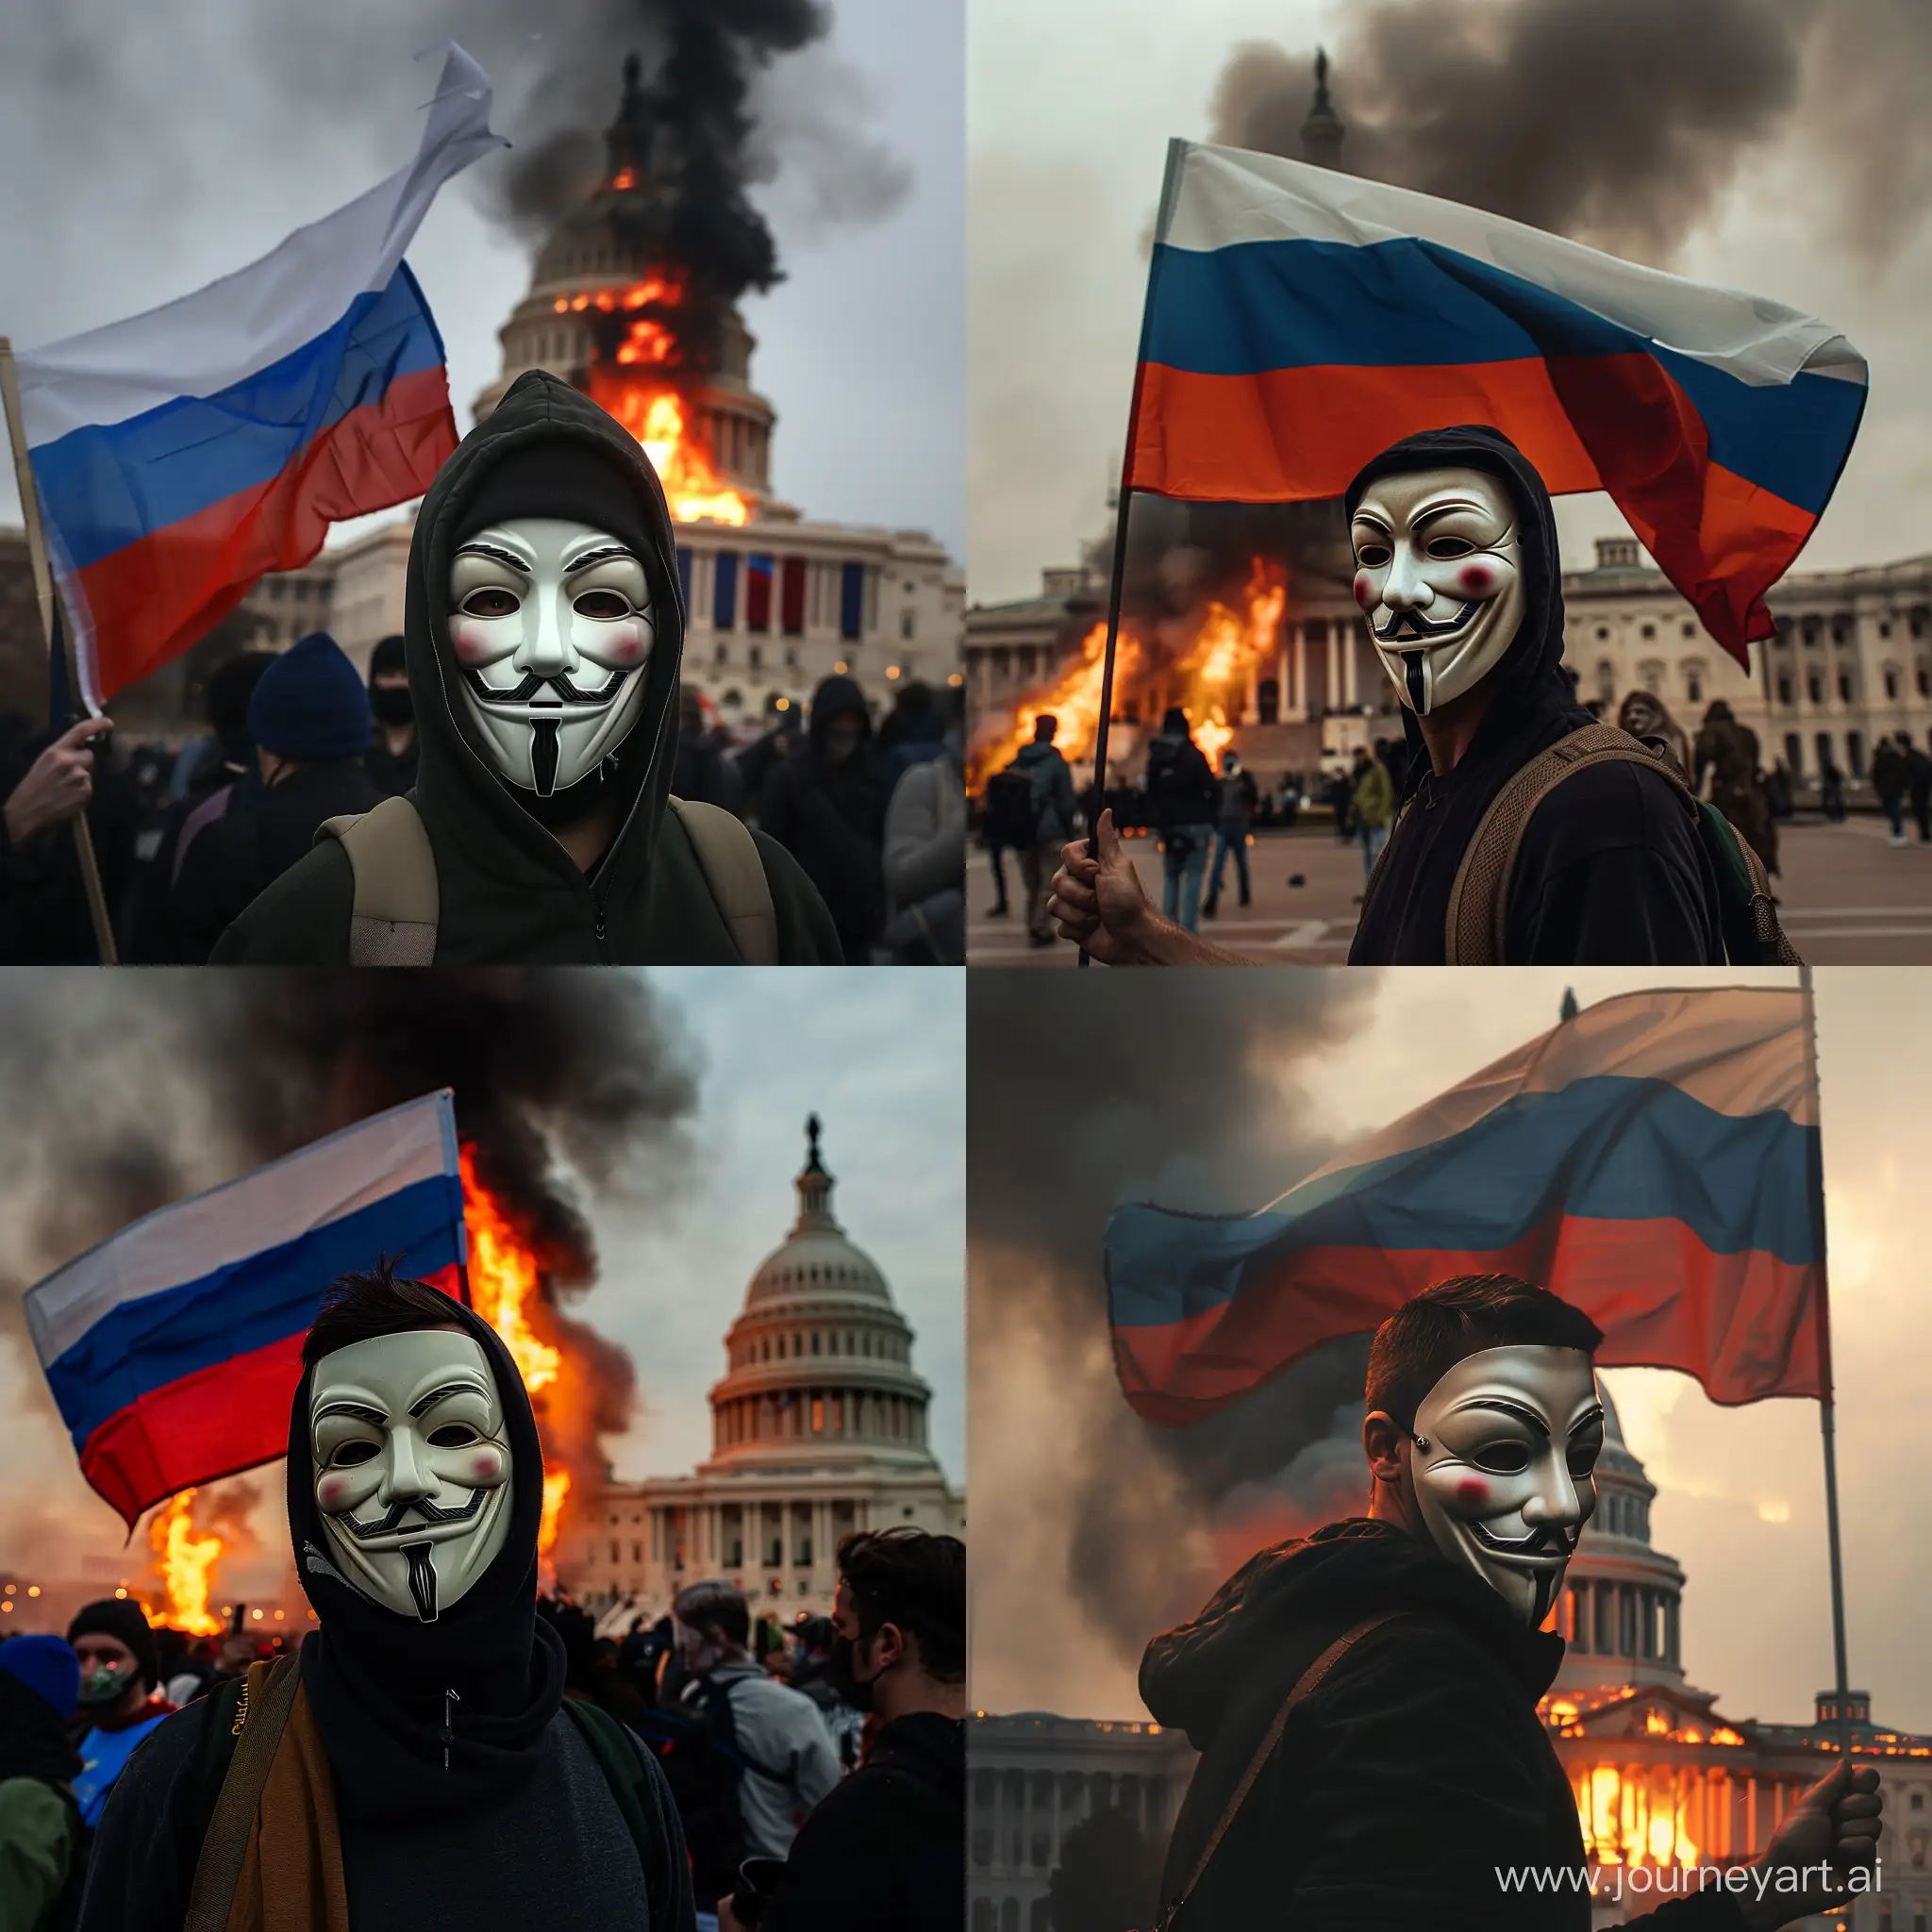 Anonymous-Protester-with-Russian-Flag-at-Burning-Capitol